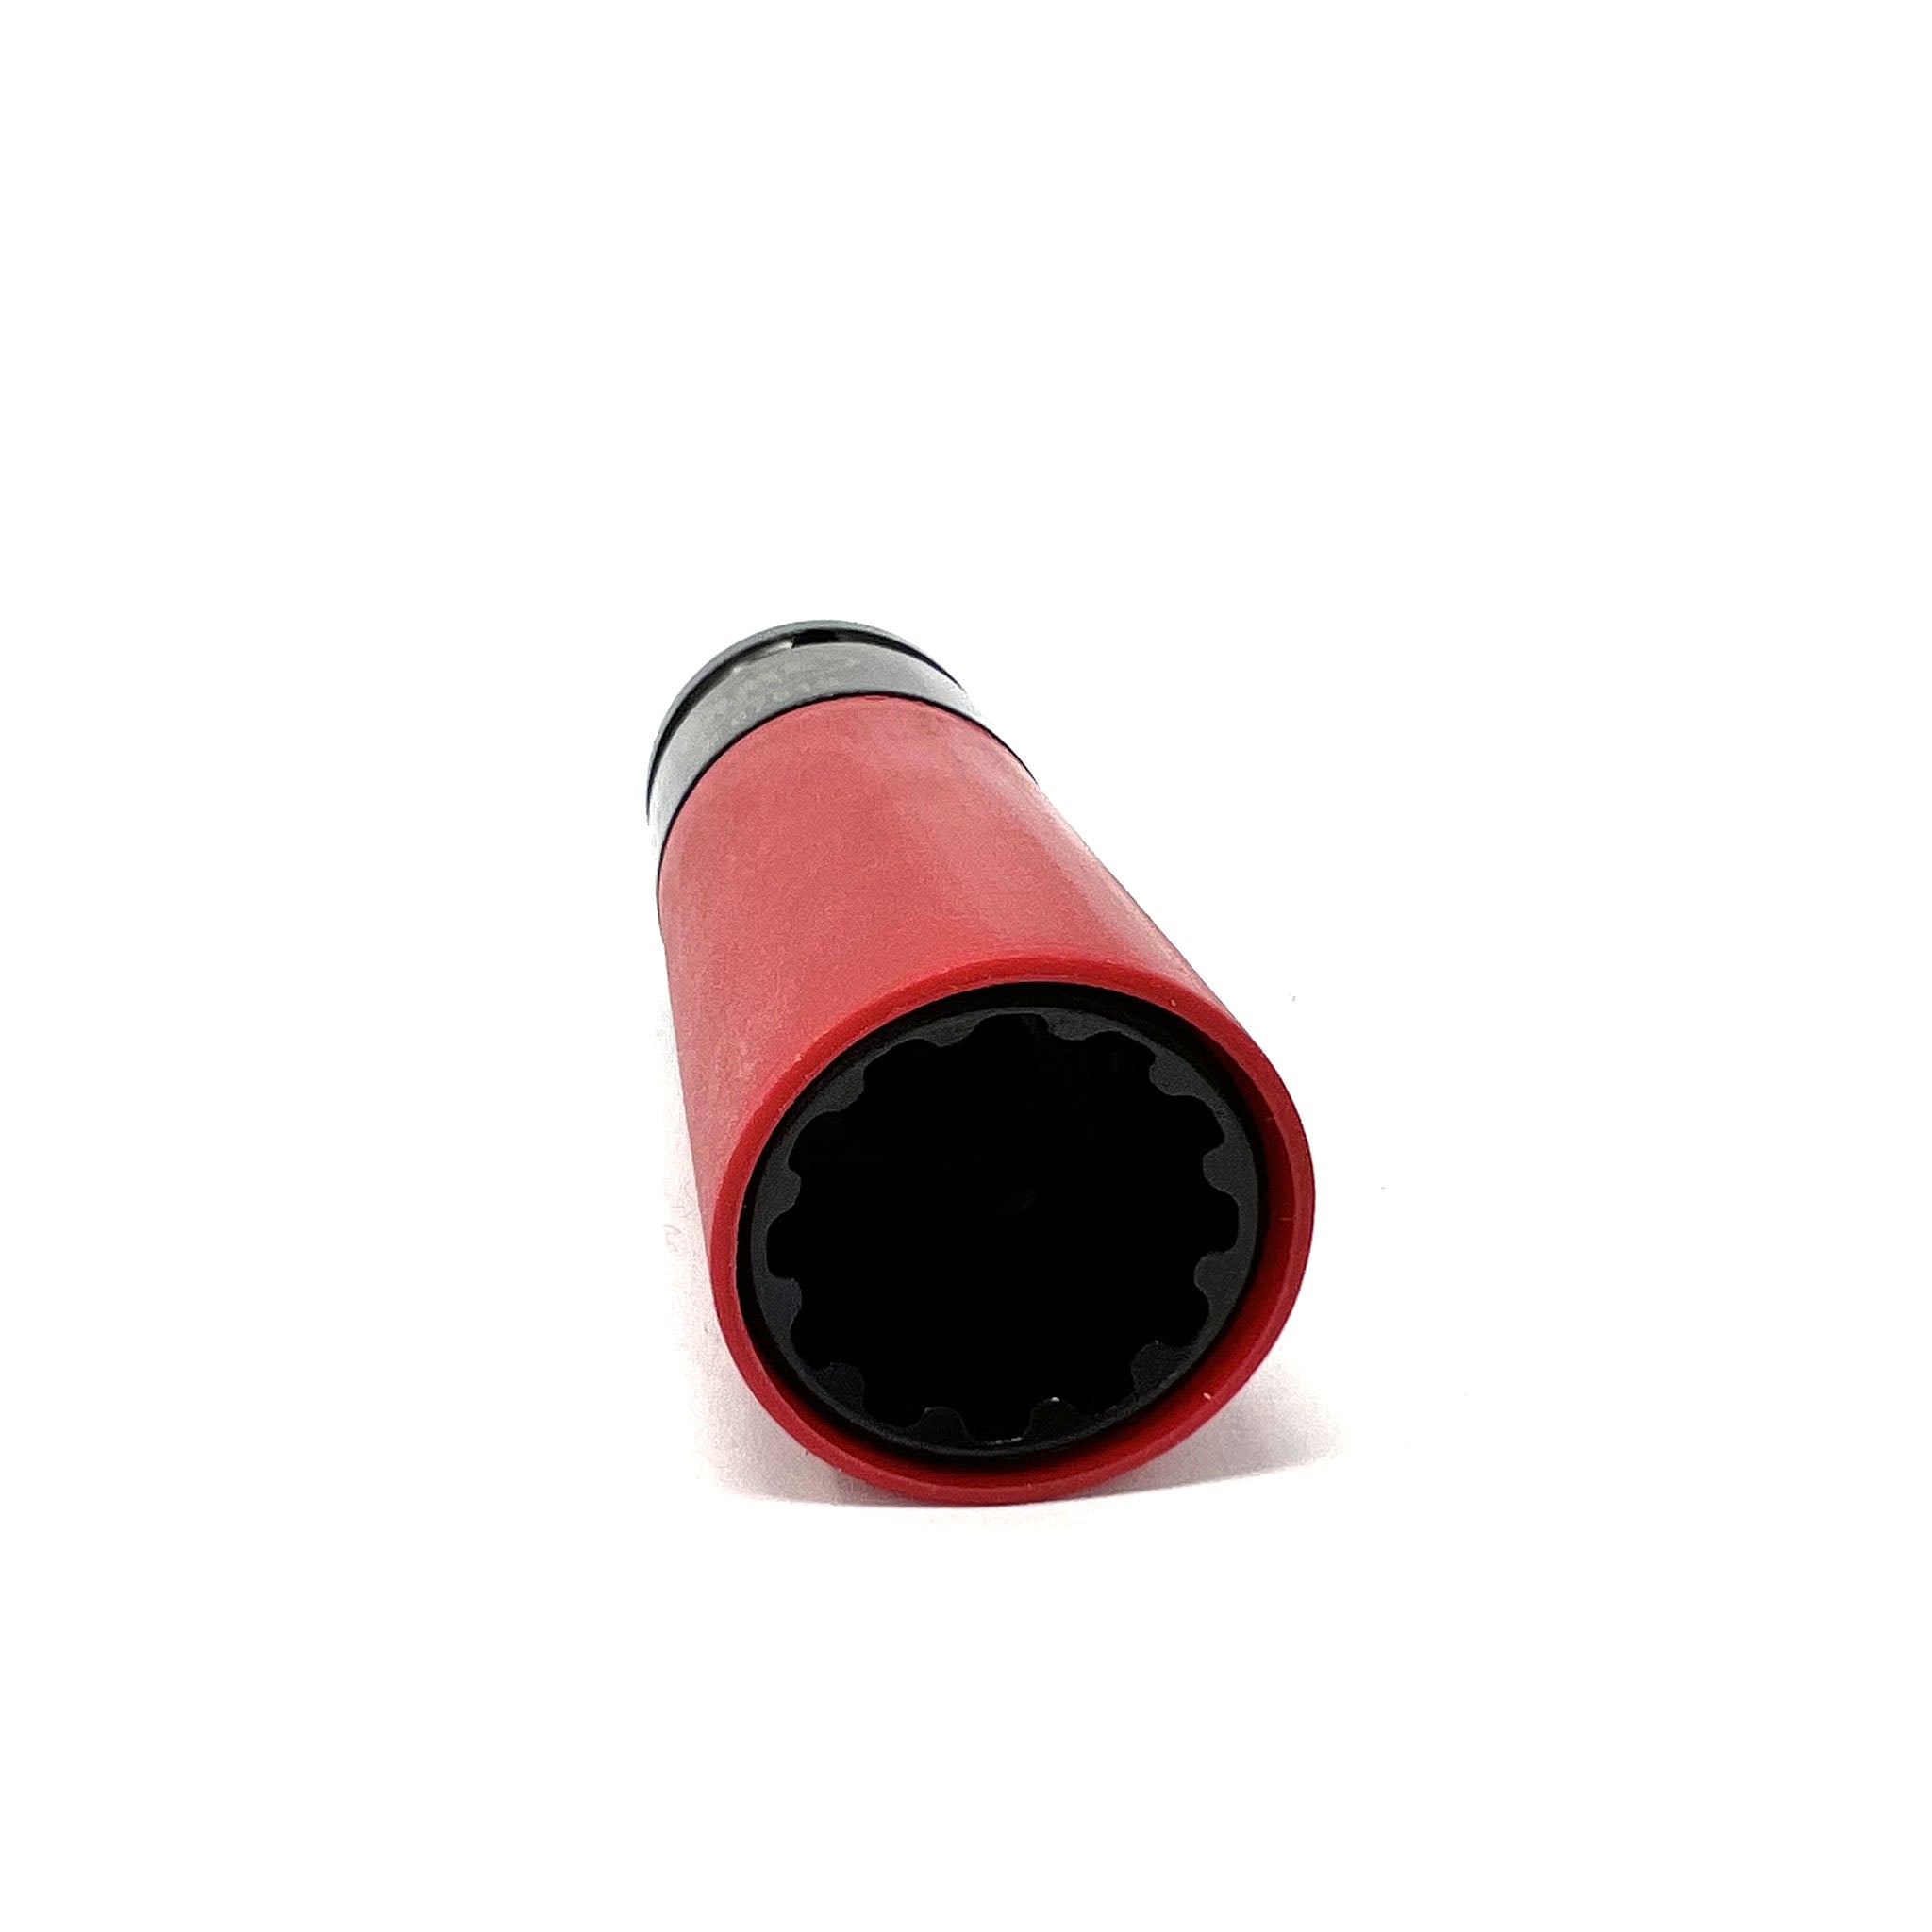 1/2in Dr. 19MM Spline Impact Socket with Sleeve